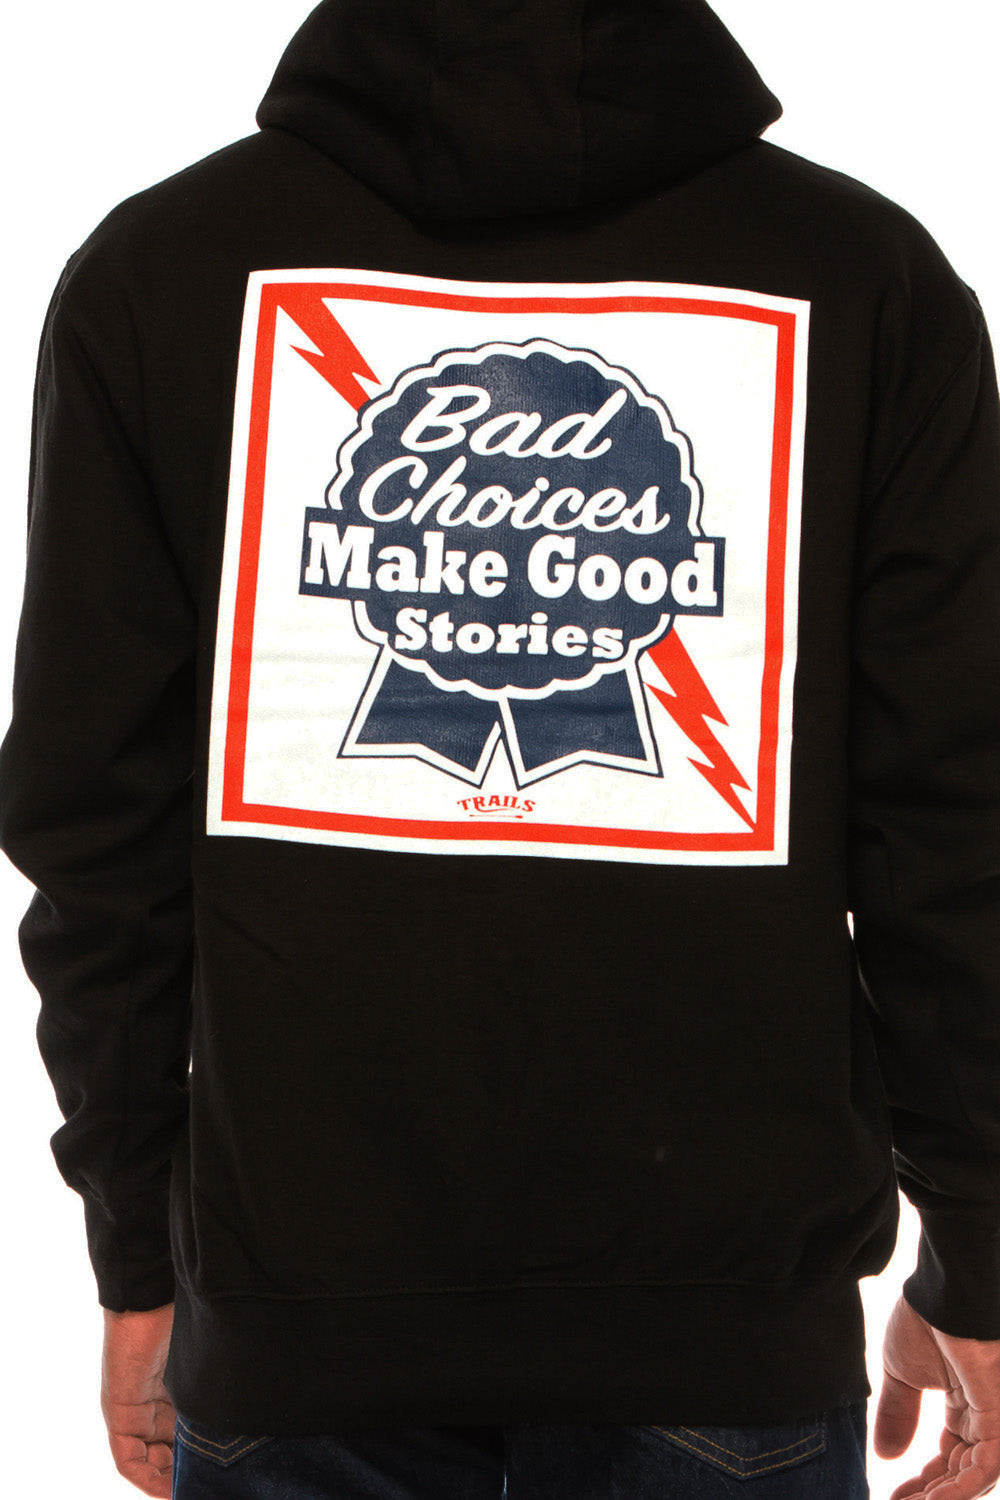 BAD CHOICES MAKE GOOD STORIES HOODIE - Trailsclothing.com